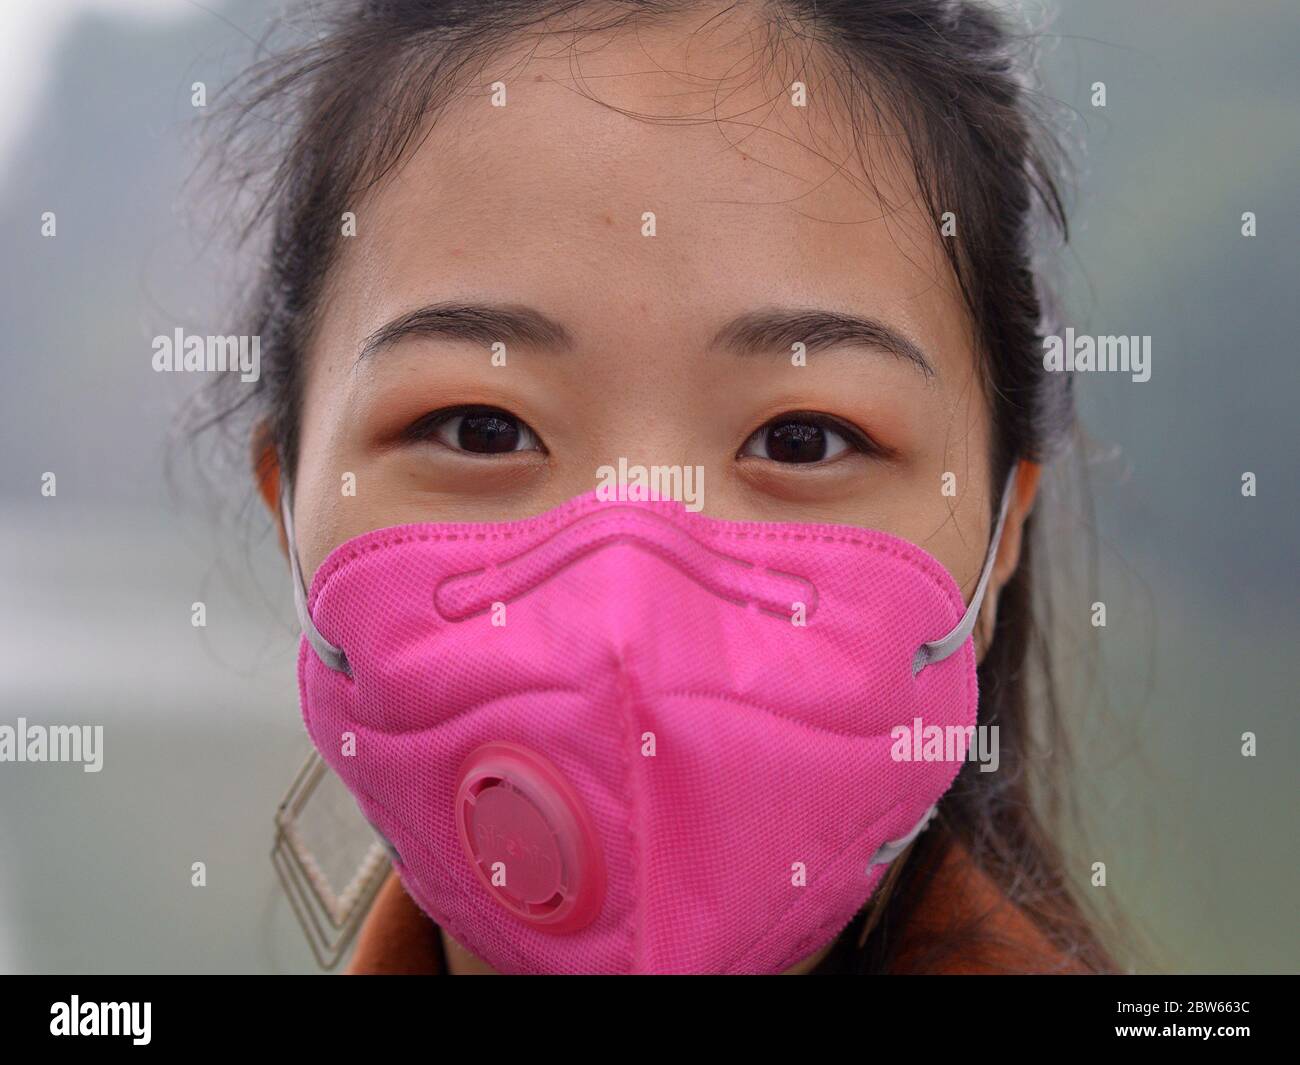 Young Vietnamese woman wears a pink protective face mask with breathing valve during the 2019/20 corona-virus pandemic. Stock Photo